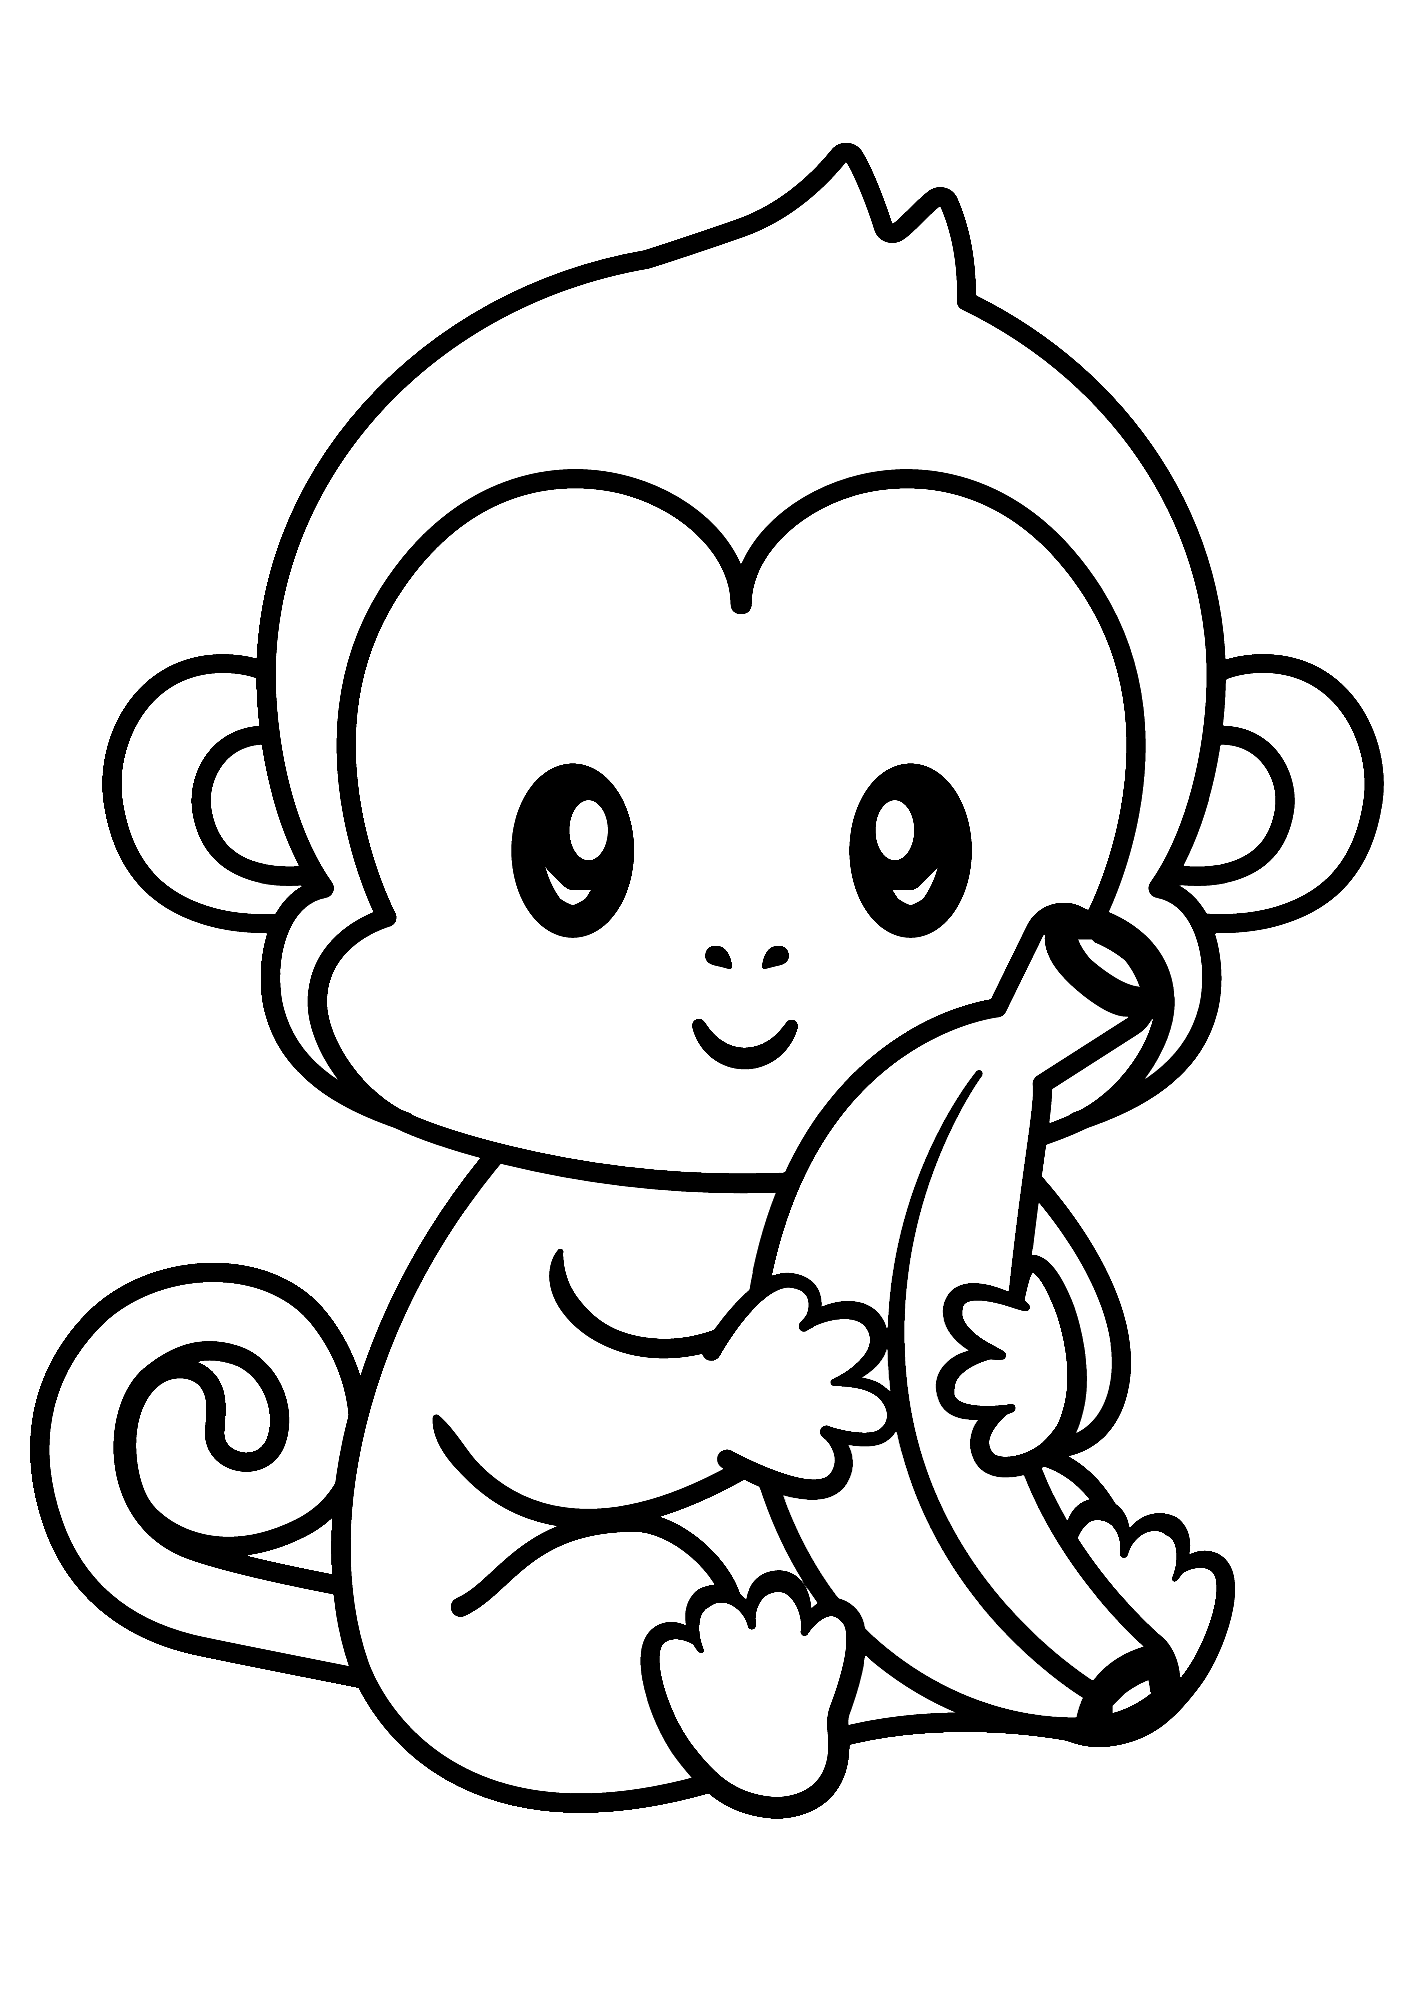 Cute Monkey And Banana Coloring Pages